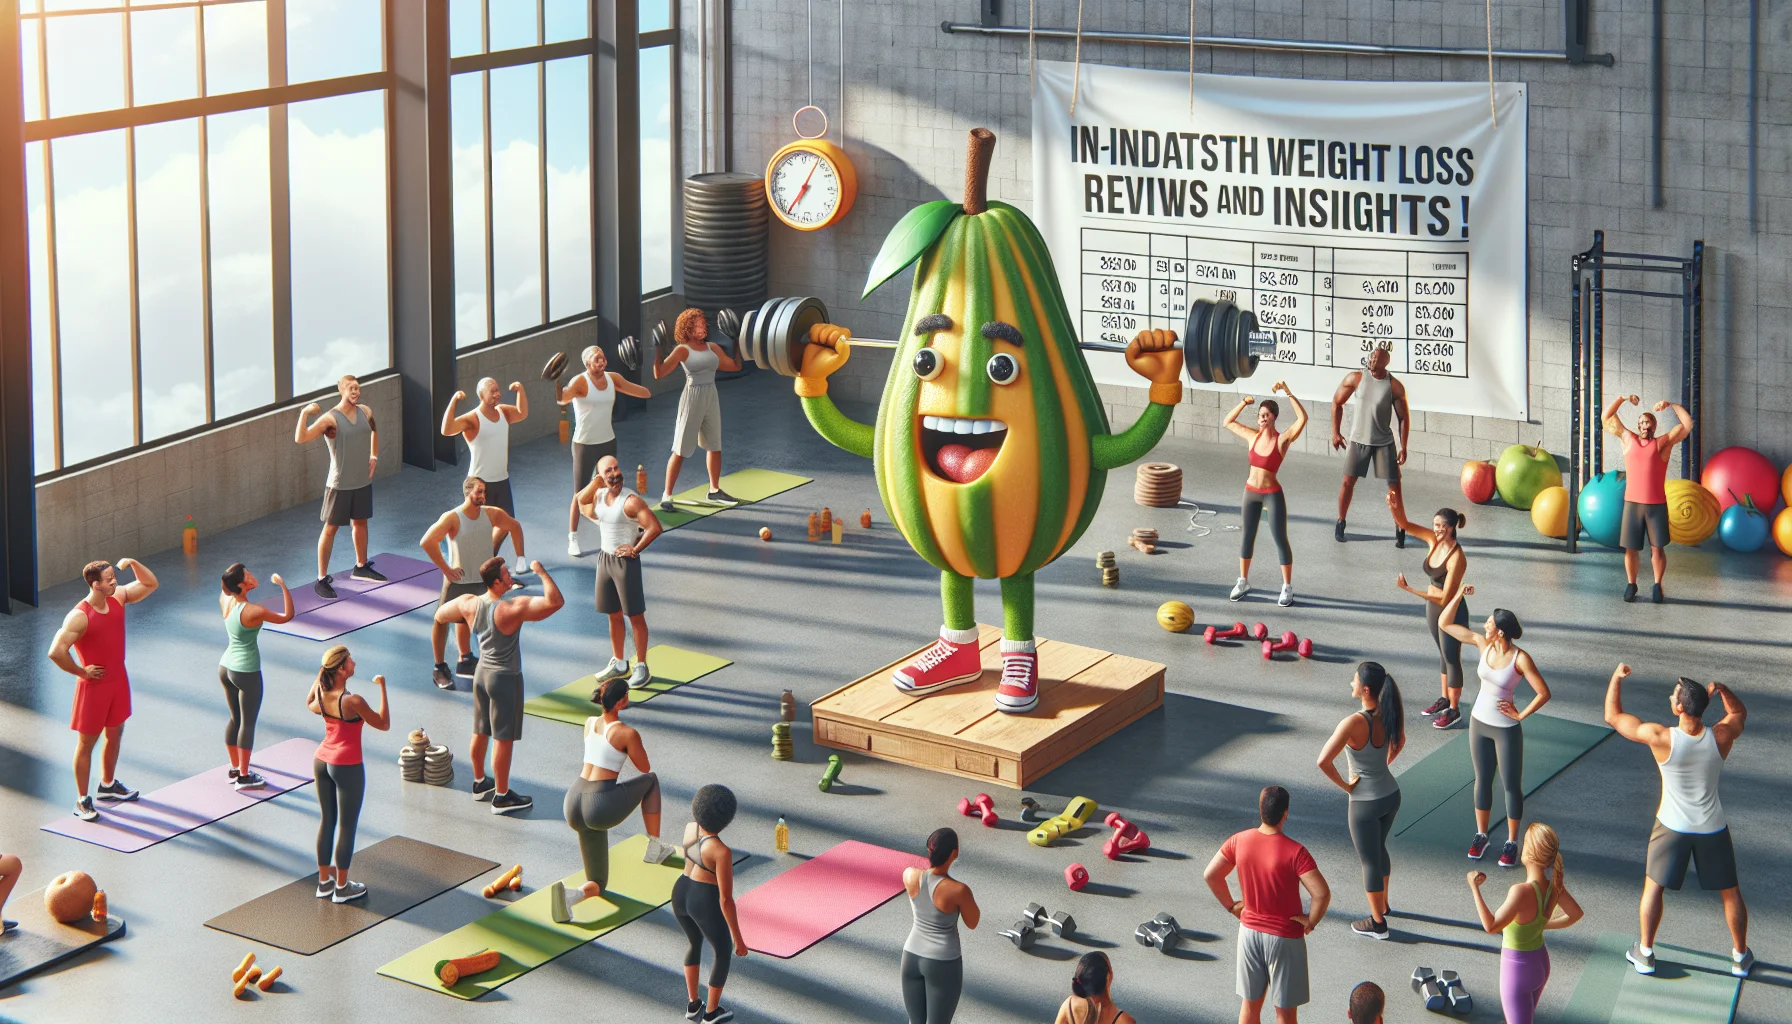 Create an imaginative and humorous scenario displaying the benefits of a diet plan, where a characteristic fruit figure is guiding people through exercises. The scene is set in a brightly lit and spacious gym. There's a realistically drawn fruit figure, wearing a fitness trainer outfit, enthusiastically demonstrating the art of weight lifting. Around him are men and women of various descents, such as Caucasian, Hispanic, and South Asian, engaged in different exercises with dumbbells, resistance bands, and yoga mats. A giant letter scale in the background reveals drastic weight loss numbers. Overhead, a banner reads 'In-Depth Weight Loss Reviews and Insights', adding a lighthearted yet encouraging atmosphere.